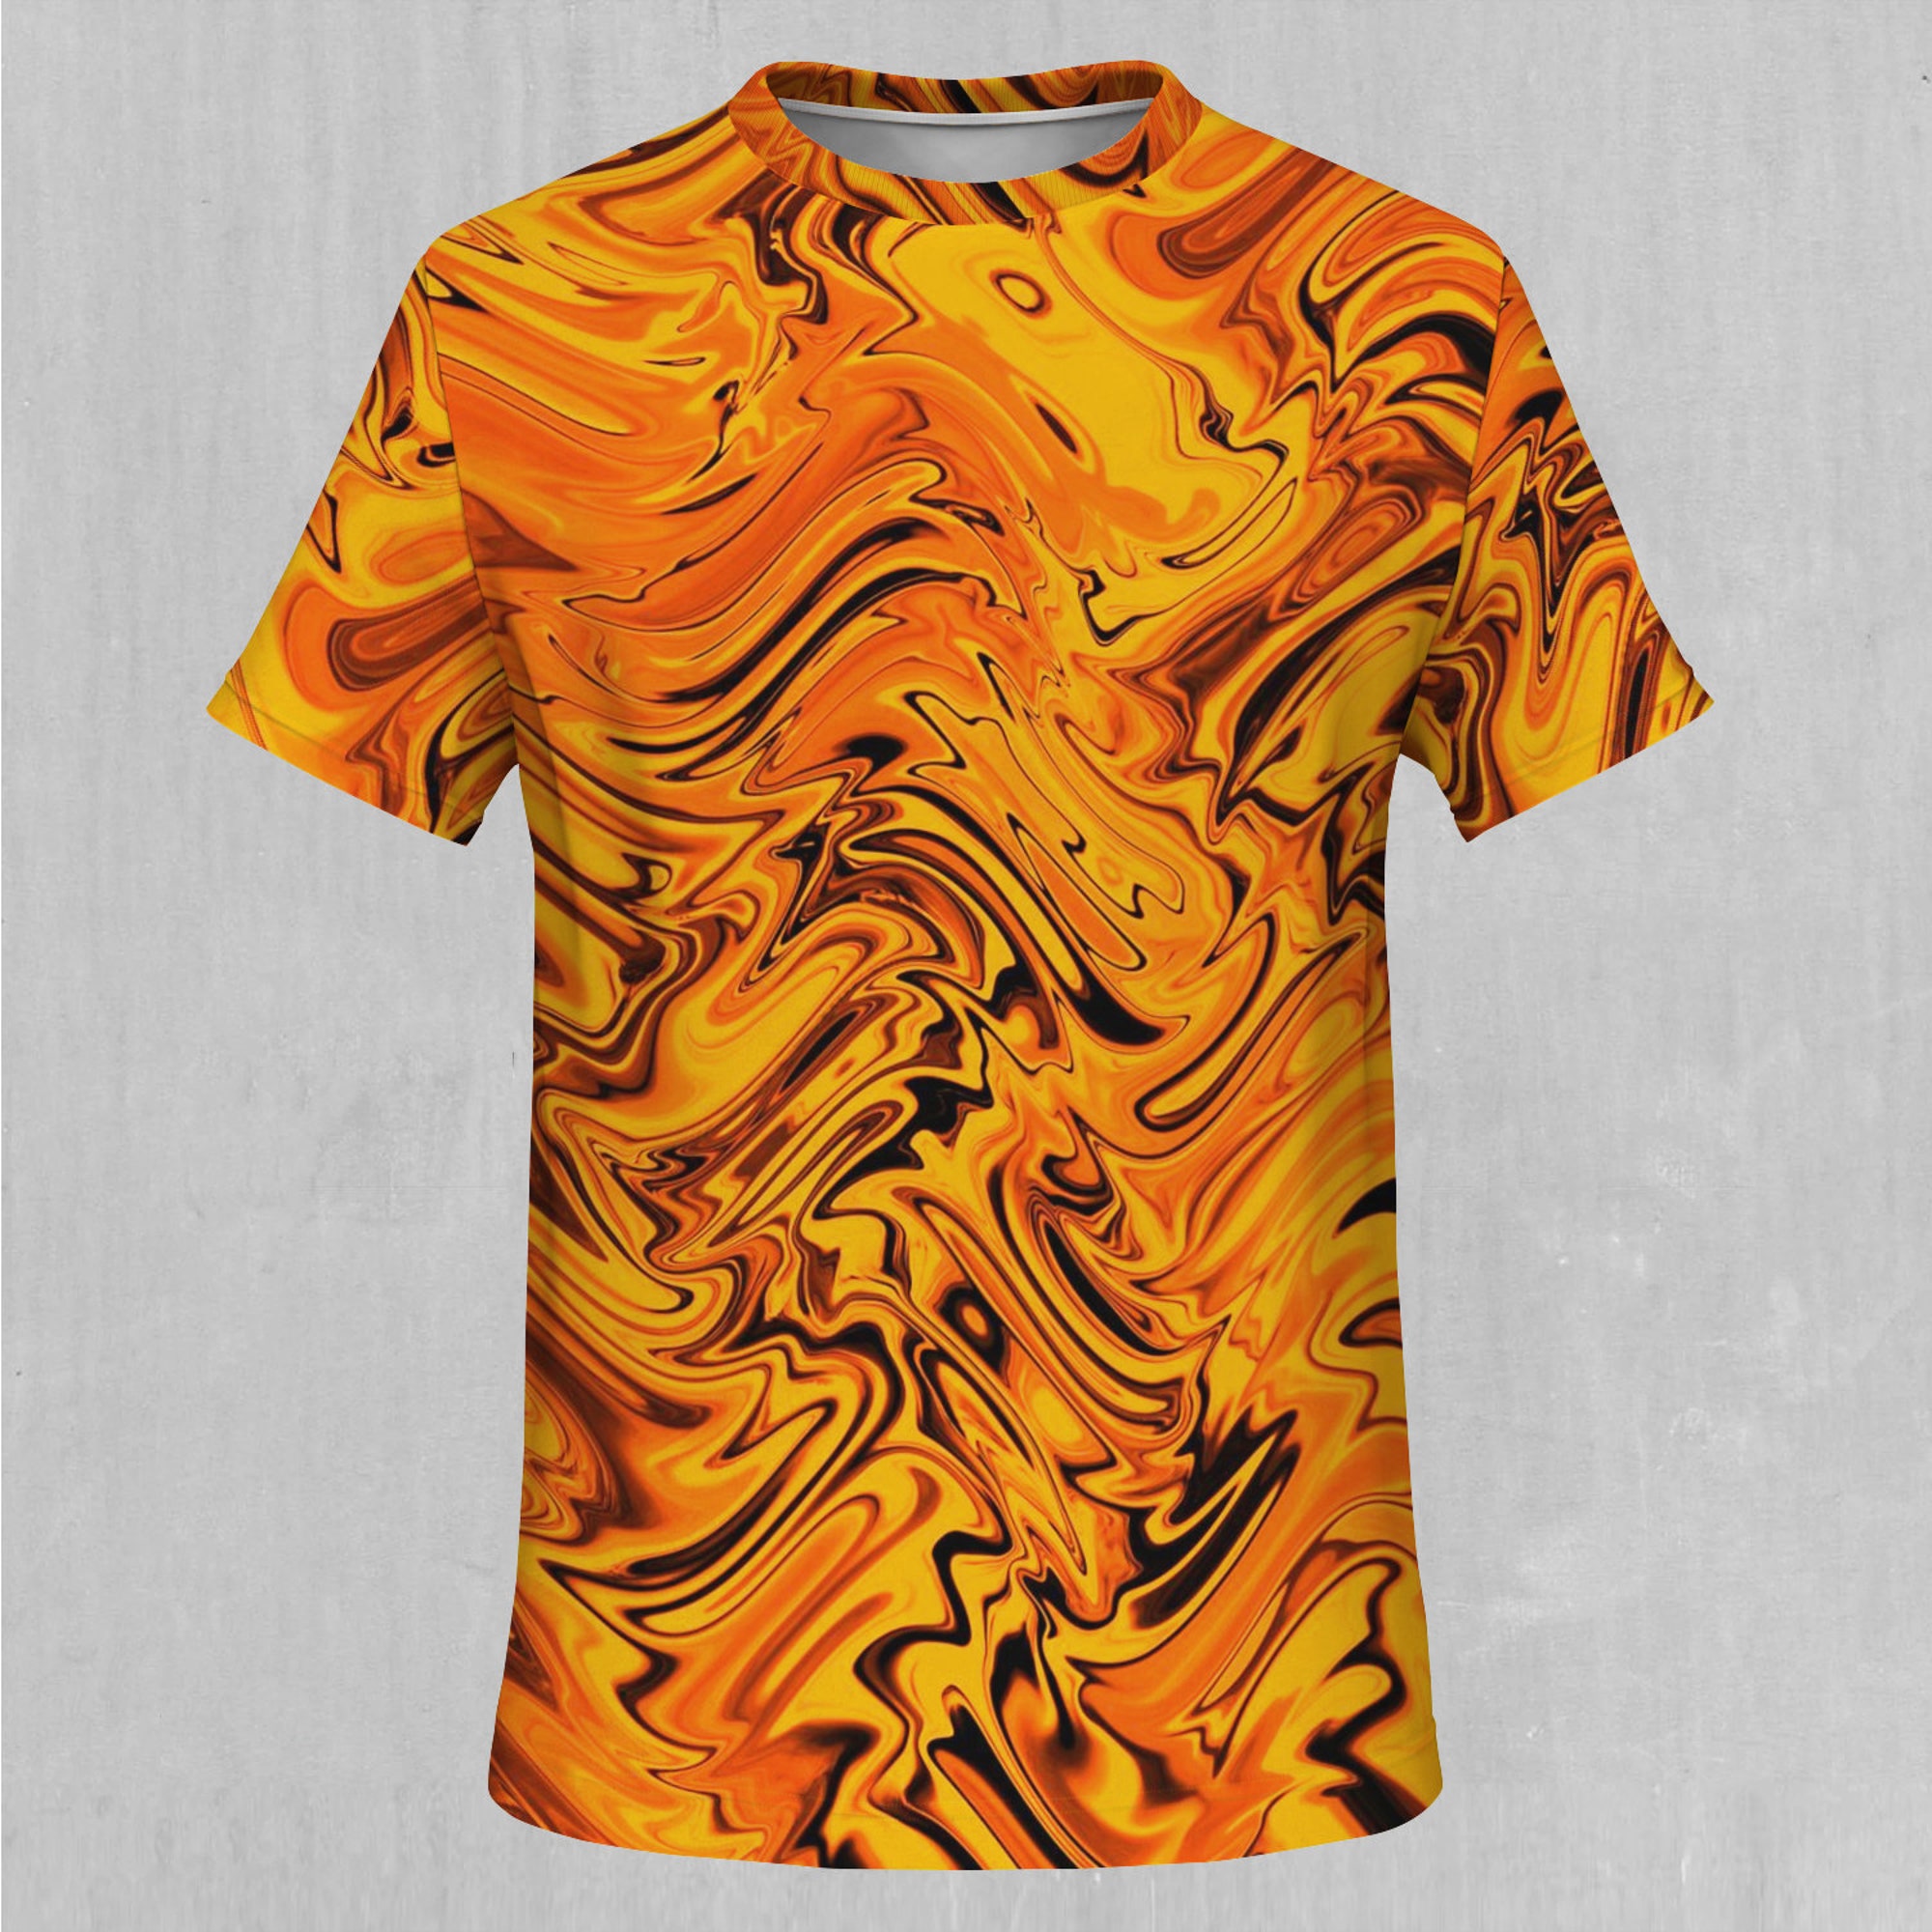 Lava Flow Psychedelic EDM Rave Festival All Over Print Tee